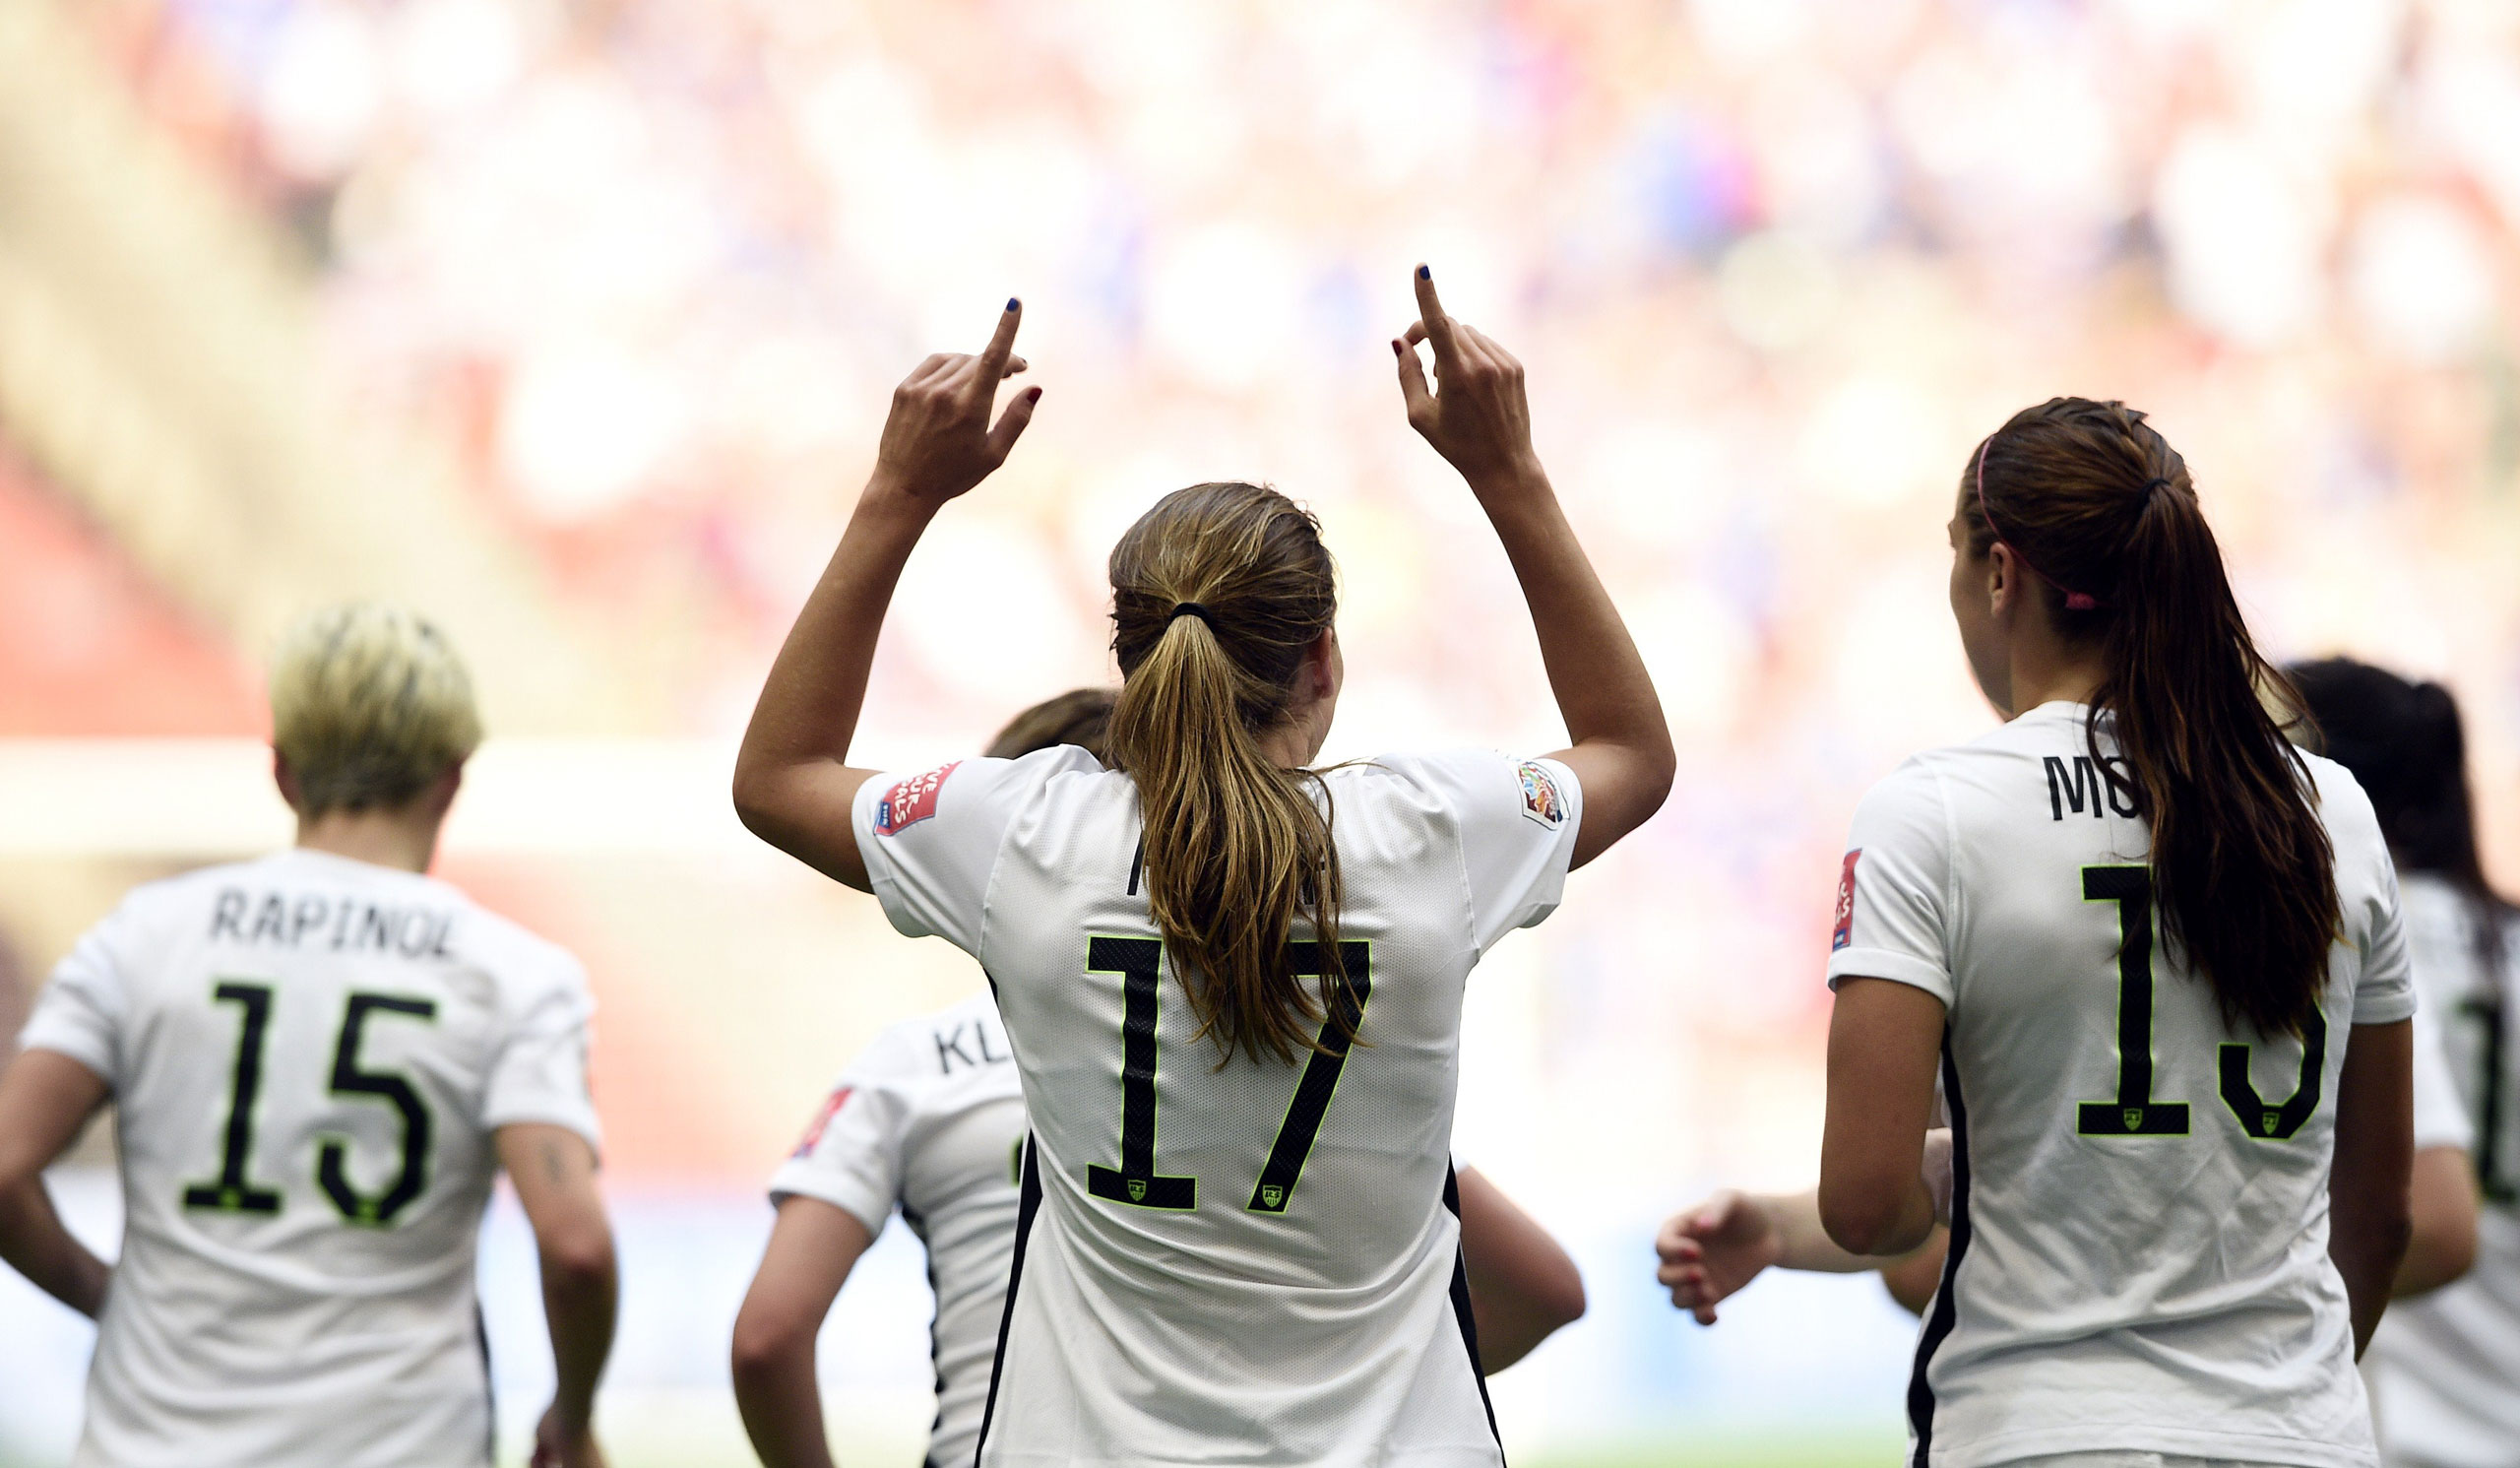 Tobin Heath celebrates her goal against Japan in the final match of the 2015 FIFA Women's World Cup at the BC Place Stadium in Vancouver on July 5, 2015.